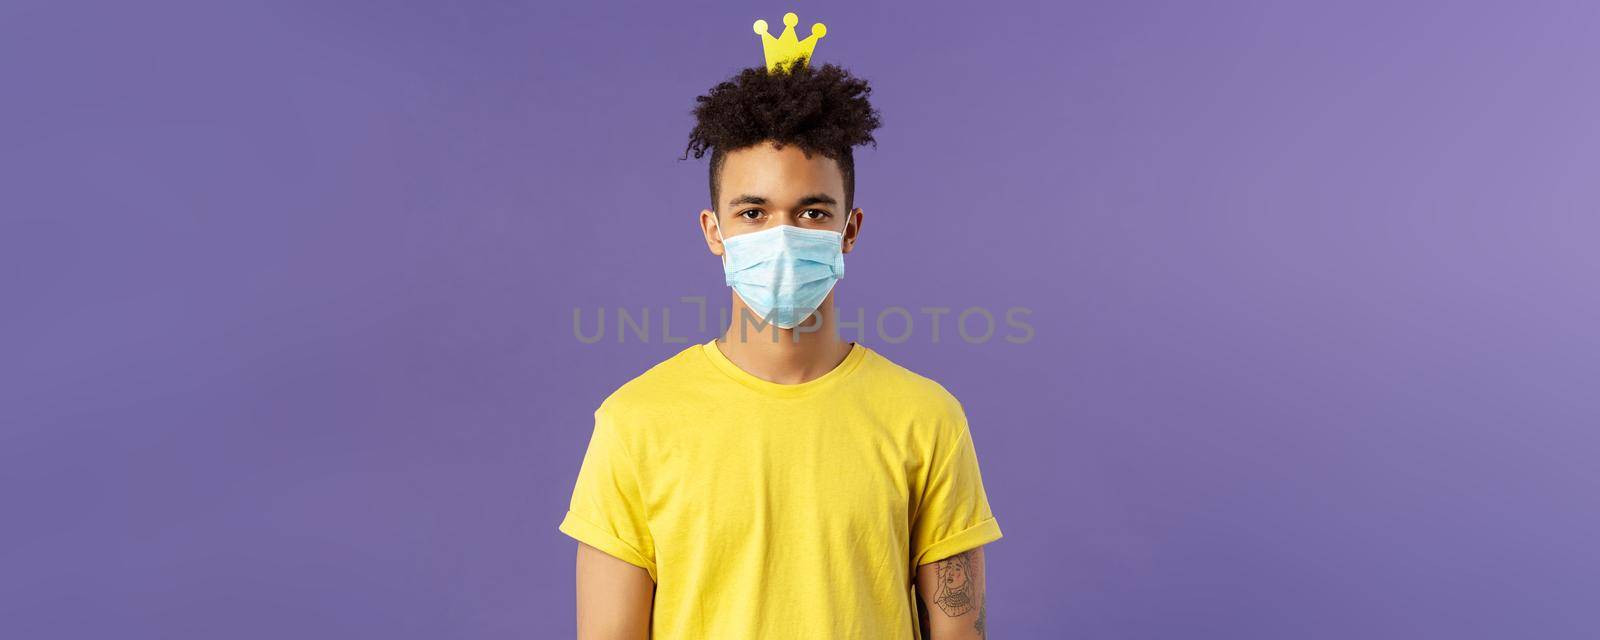 Portrait of funny hispanic guy in face mask, fool around, going crazy staying inside home during quarantine, wearing small crown and look camera, social-distancing, staying healthy covid19 pandemia.